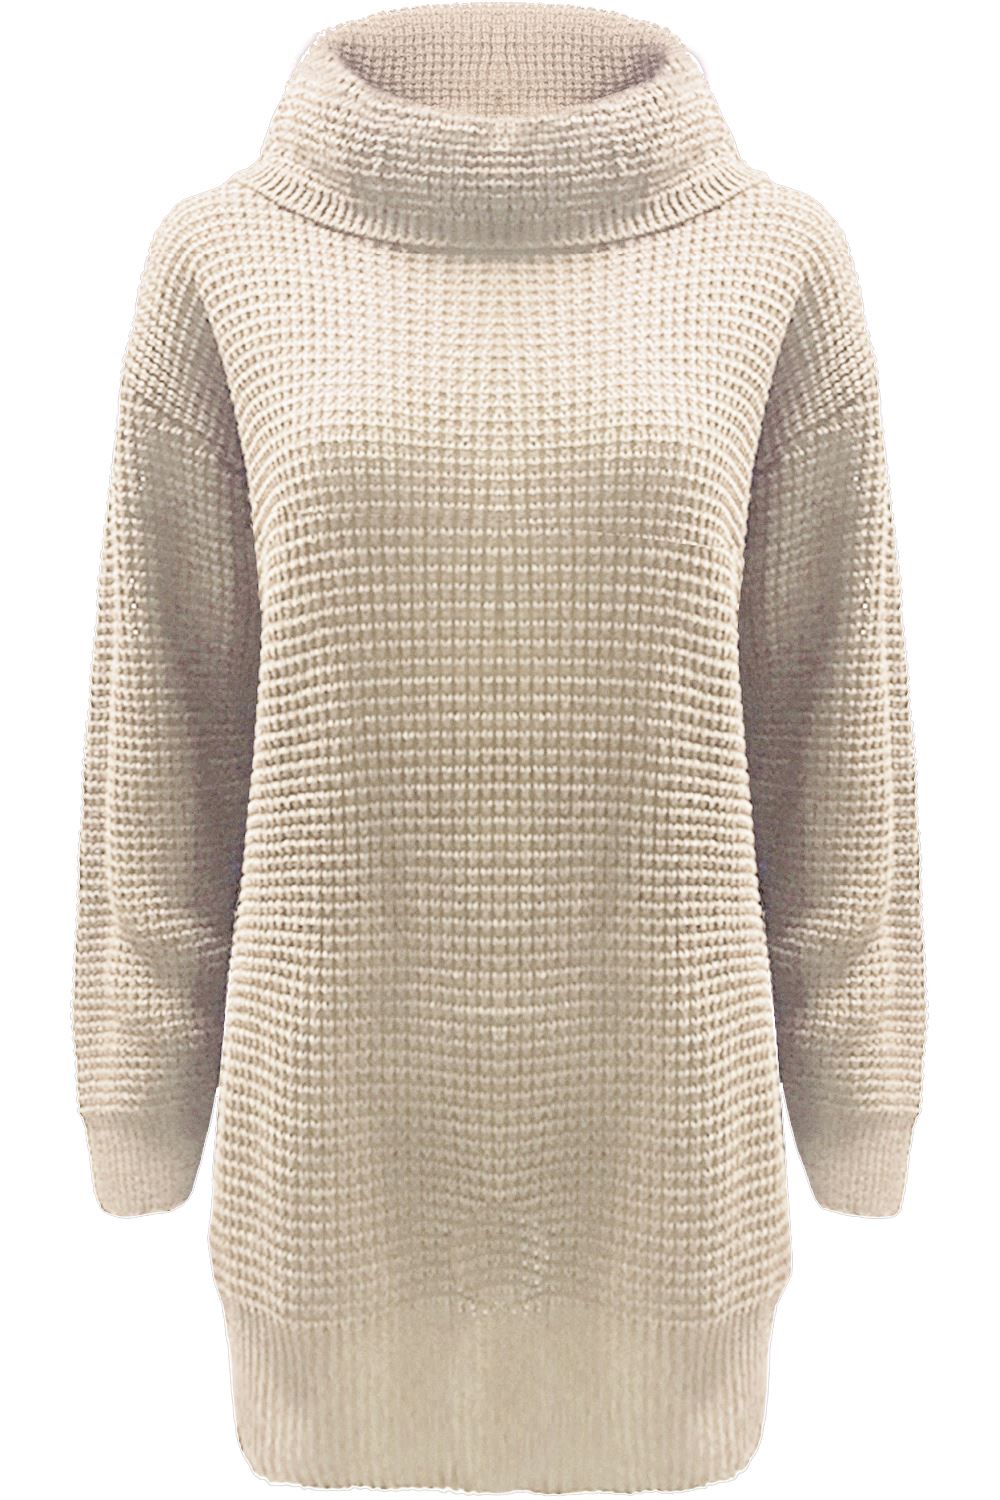 knitted jumpers womens-dress-ladies-baggy-jumper-long-sleeve-cowl- kueoqex